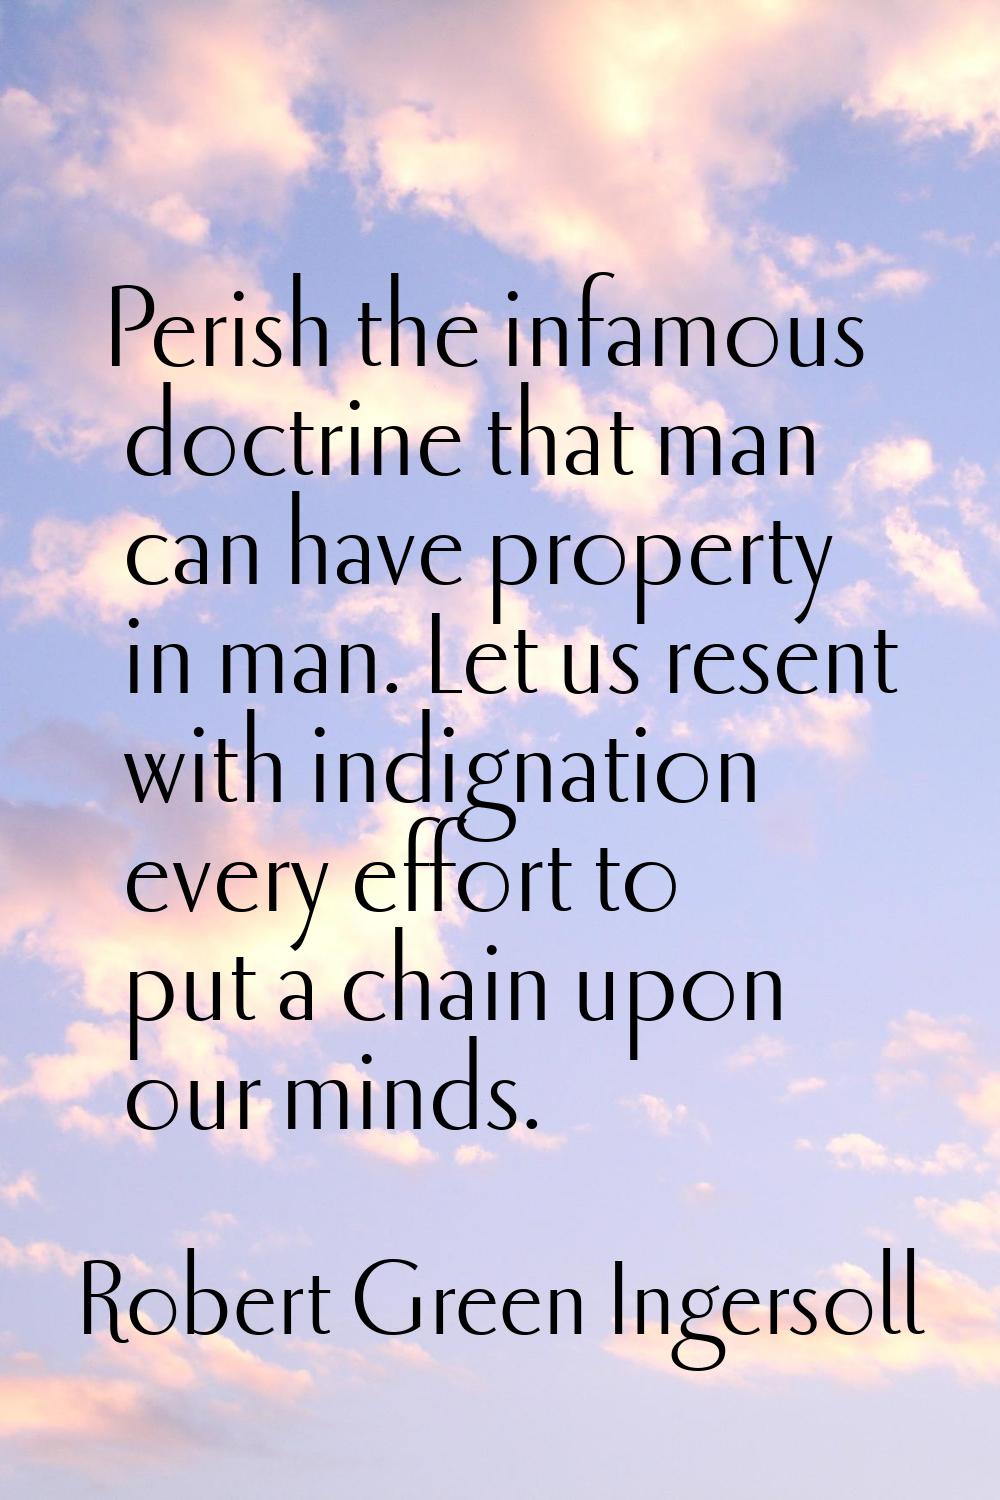 Perish the infamous doctrine that man can have property in man. Let us resent with indignation ever